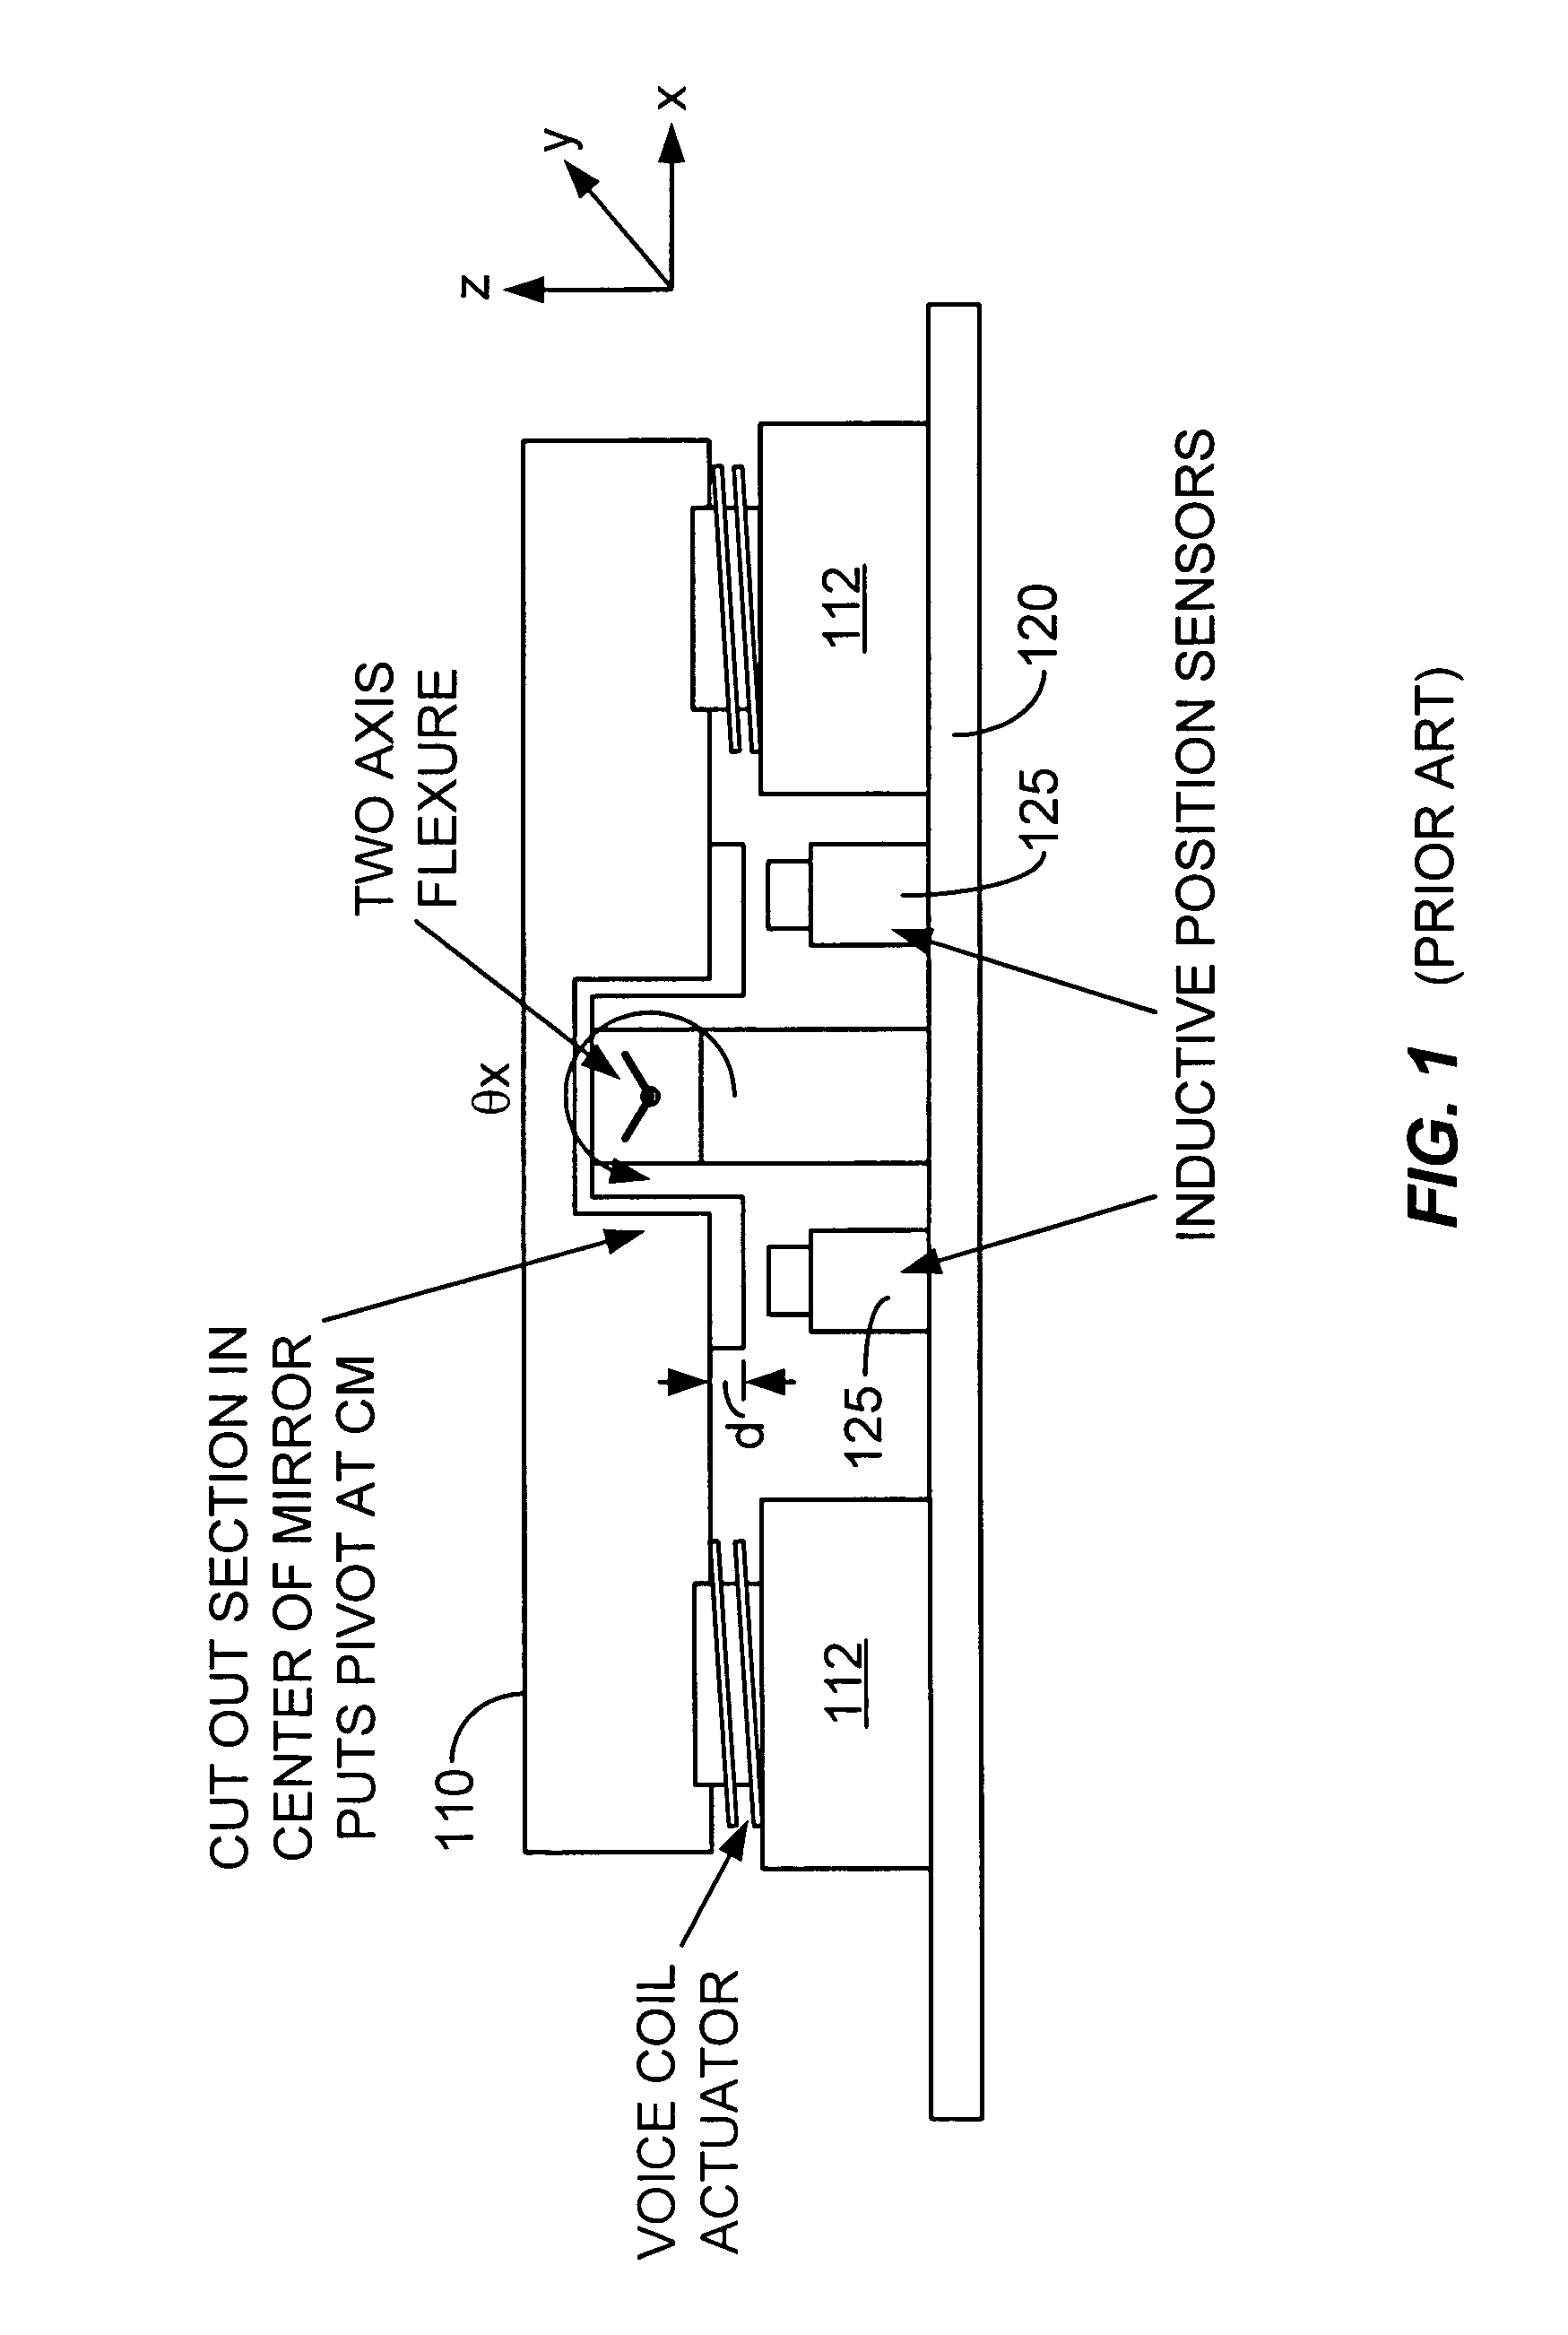 Actively-supported multi-degree of freedom steerable mirror apparatus and method